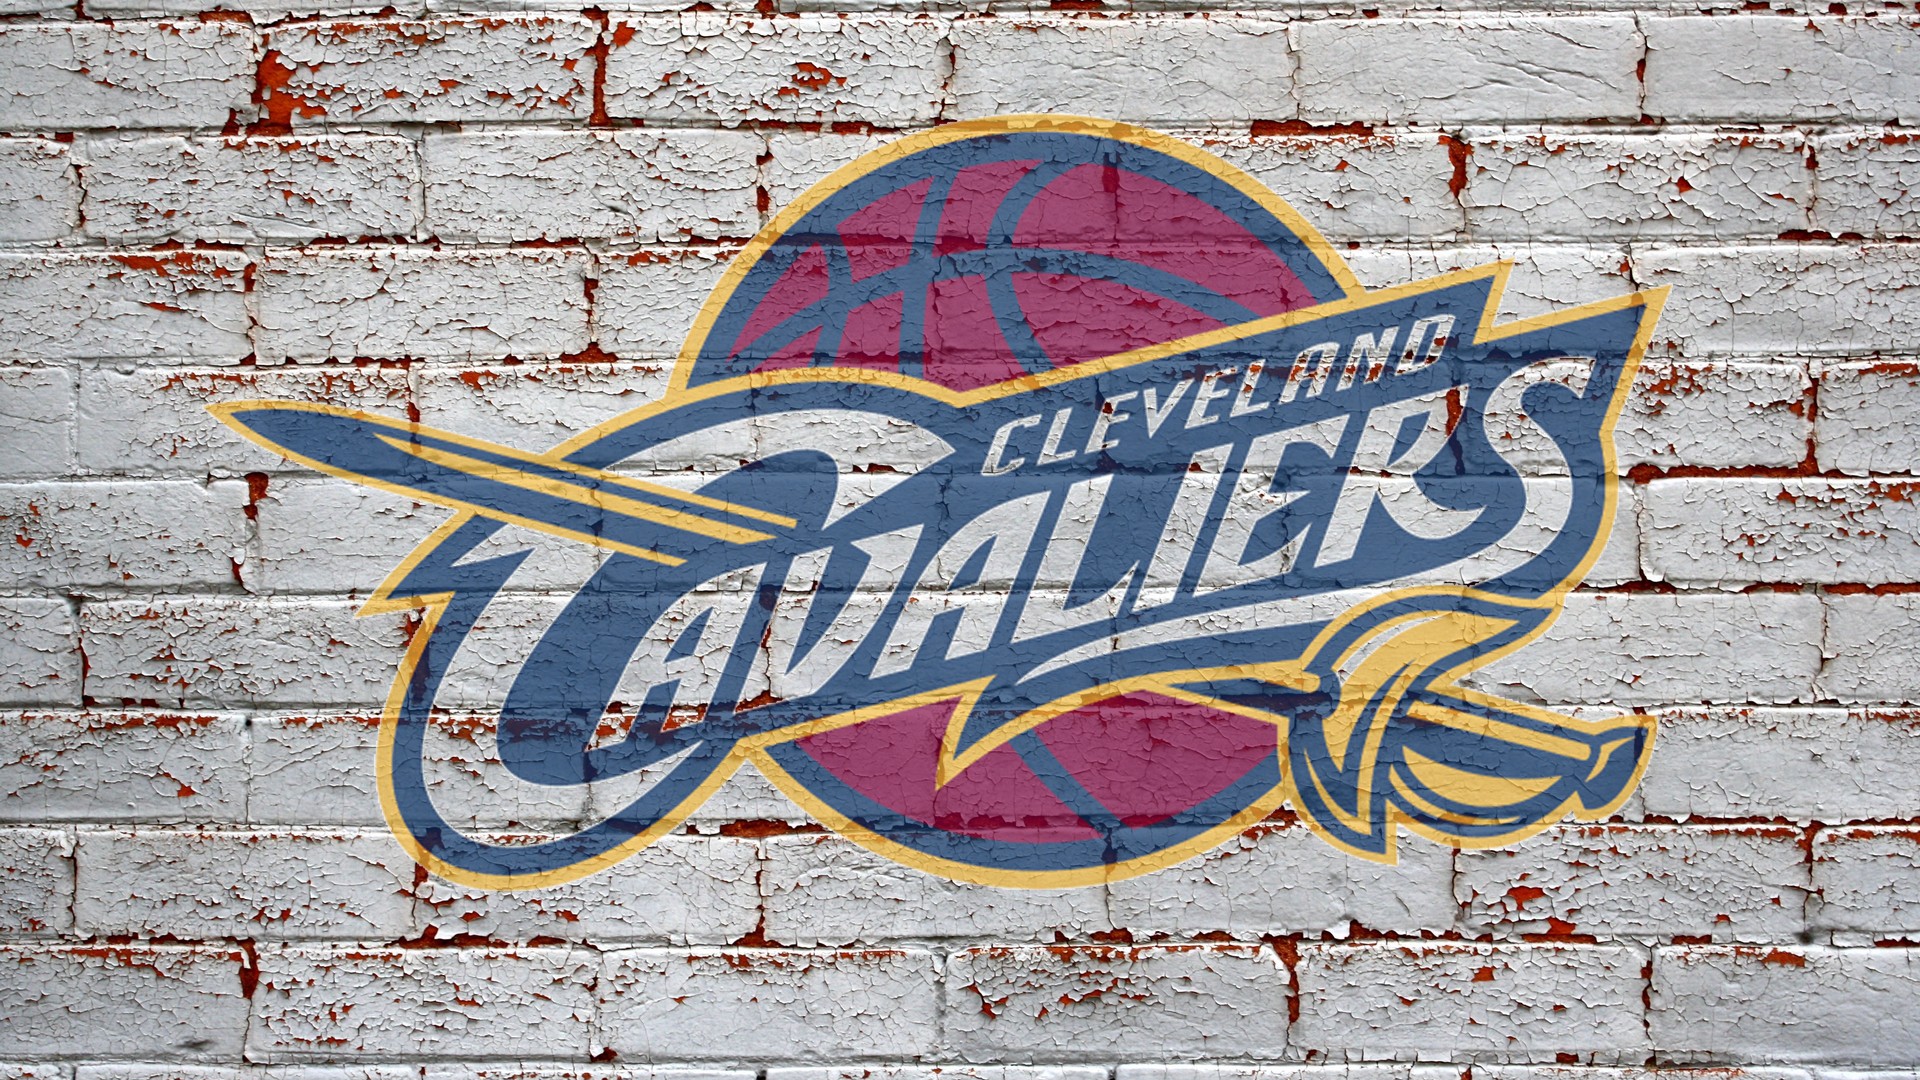 Wallpaper Mobile Cleveland Cavaliers  2023 Basketball Wallpaper  Cavaliers  wallpaper Cleveland cavaliers Cavaliers basketball